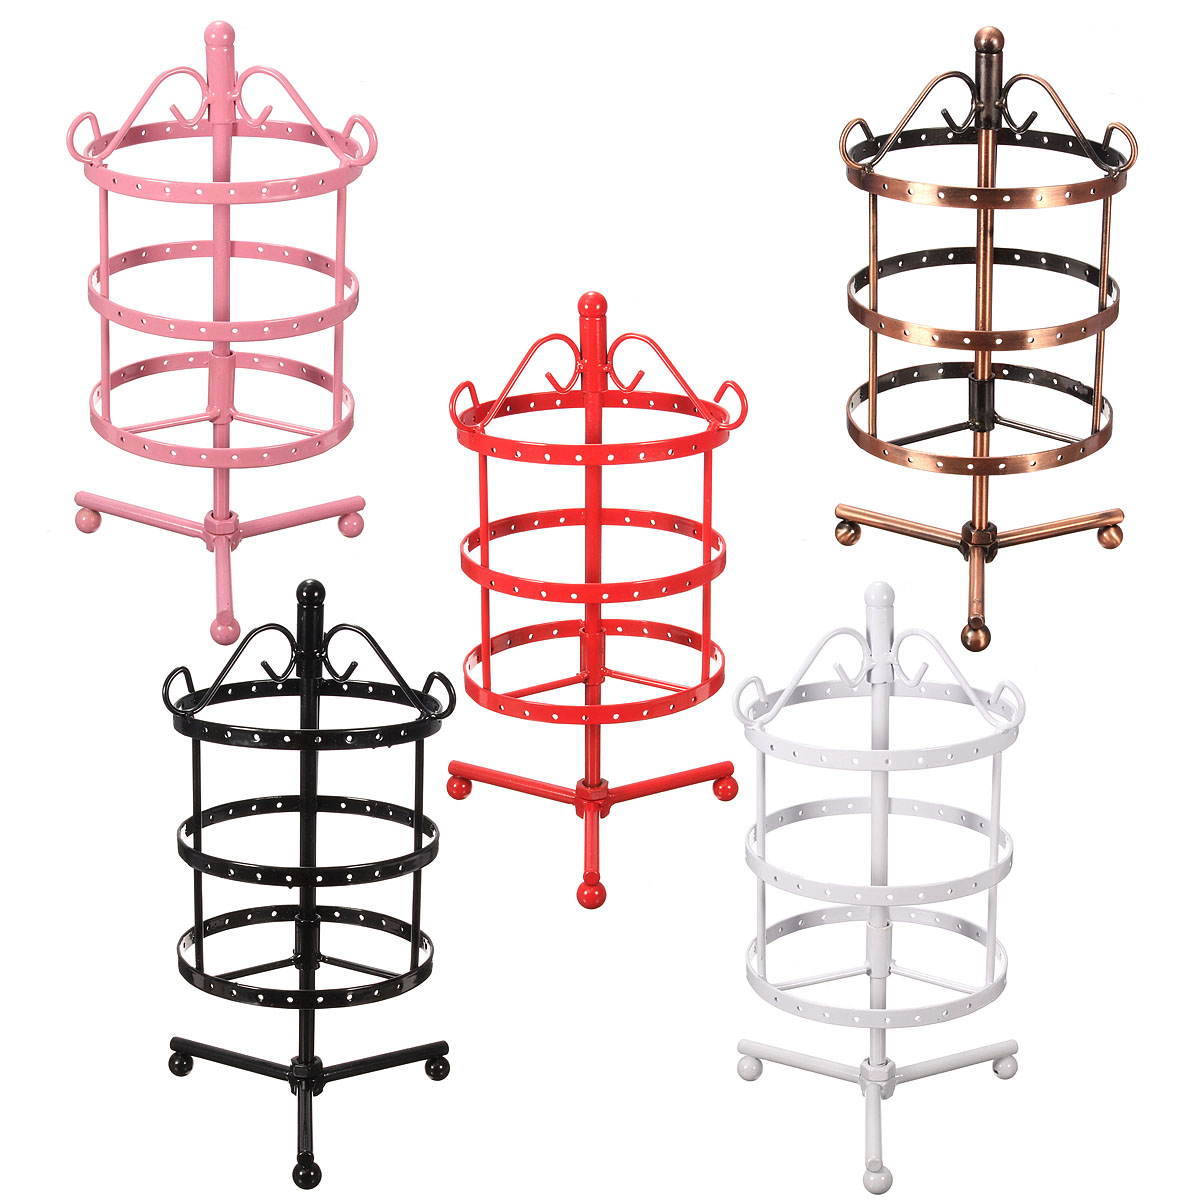 72-Holes-Metal-Round-Shaped-Jewelry-Display-Stand-Holder-Showcase-1028242